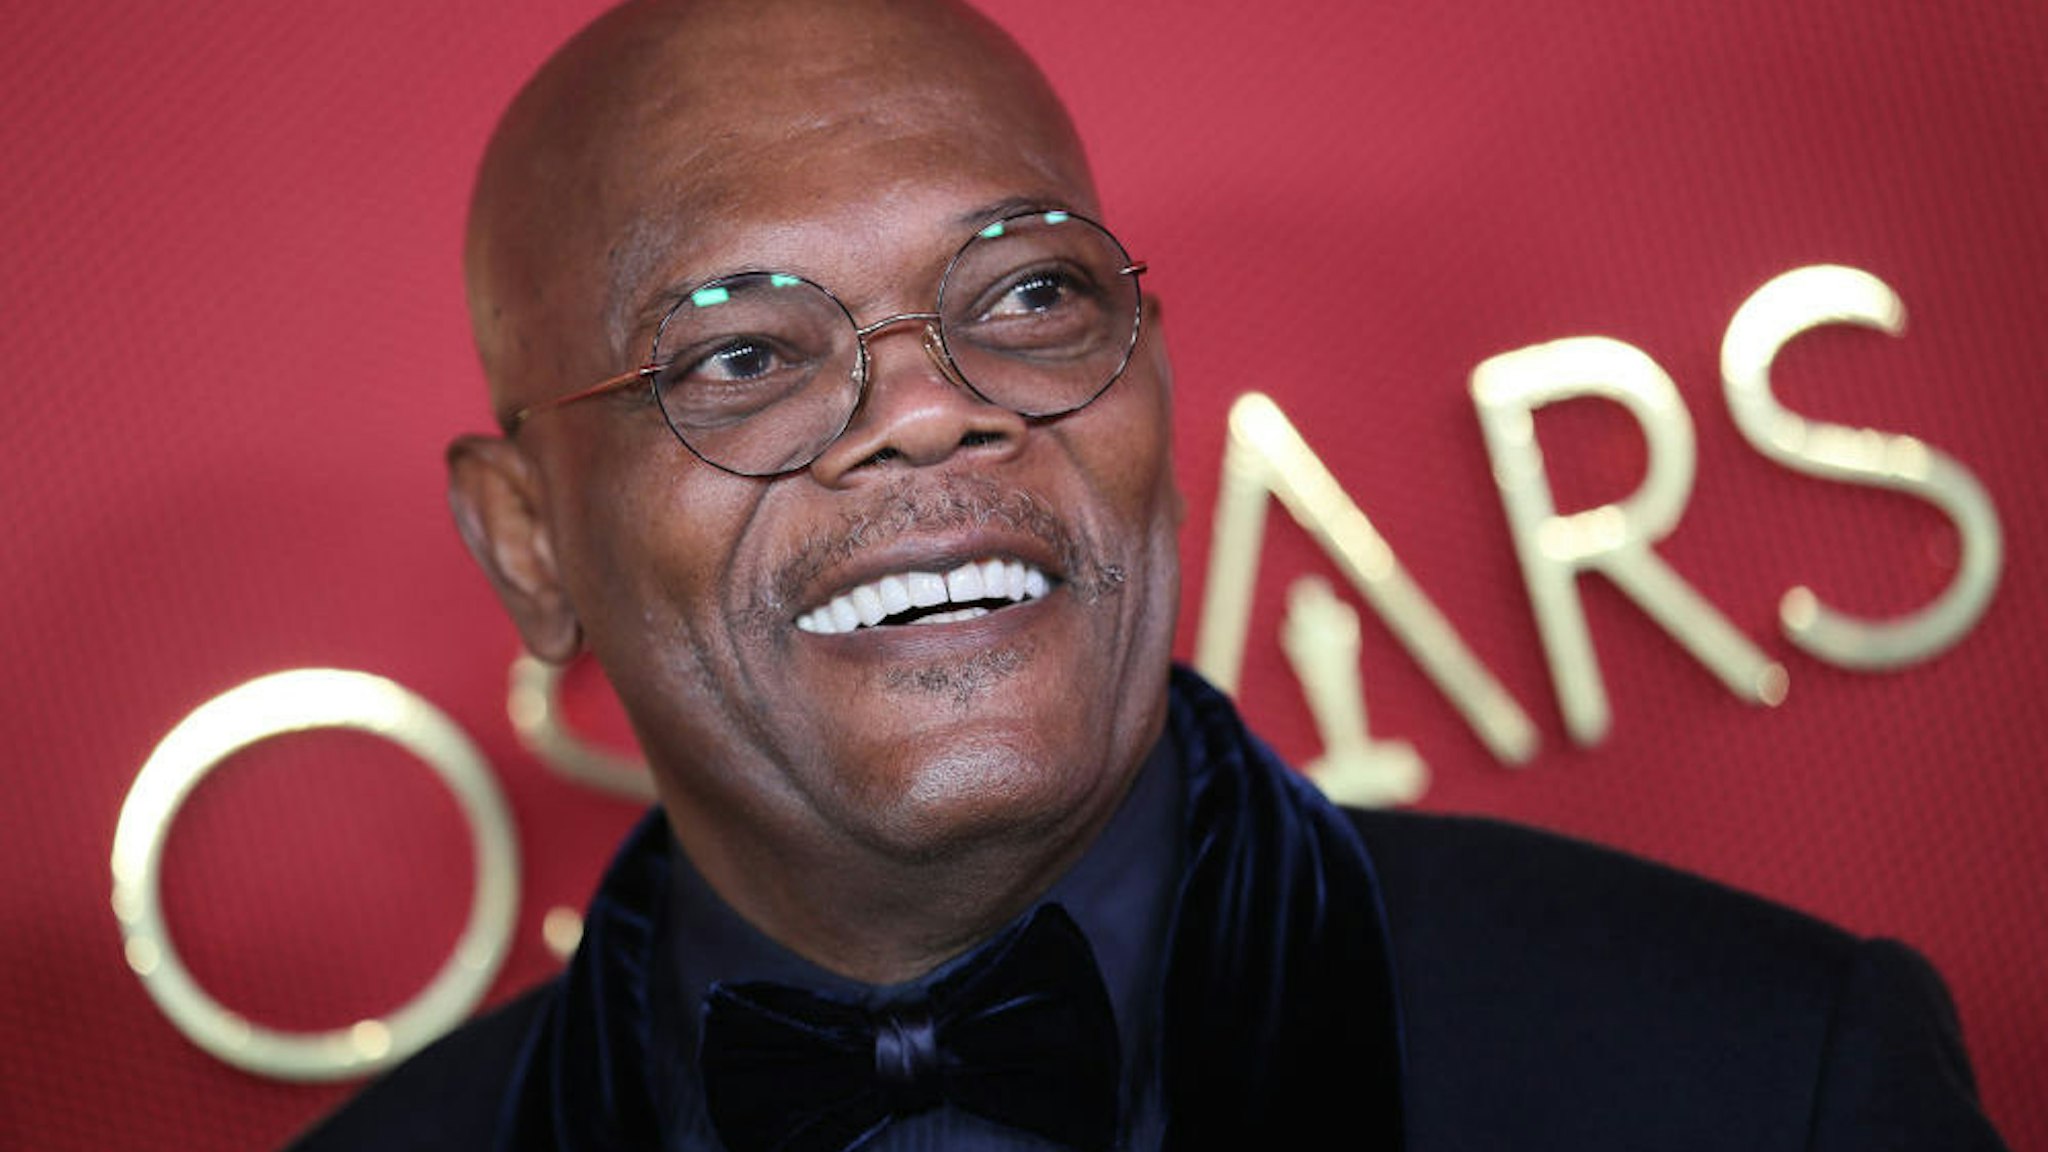 Samuel L. Jackson attends the 2022 Governors Awards at The Ray Dolby Ballroom at Hollywood & Highland Center on March 25, 2022 in Hollywood, California.